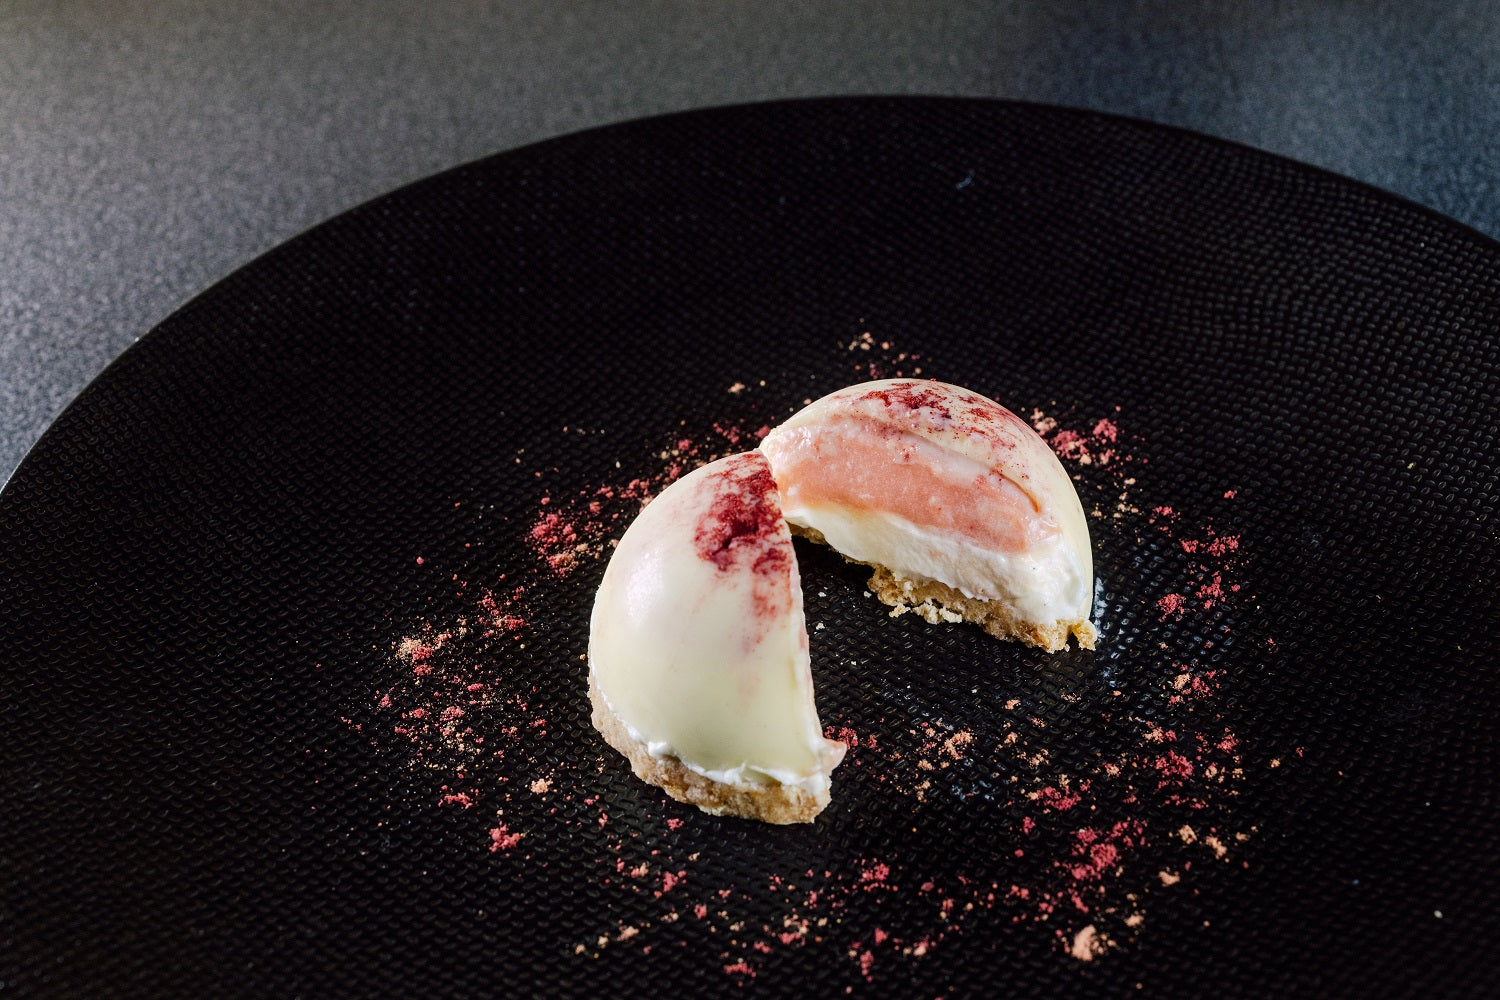 Friday: Rhubarb and White Chocolate Dome